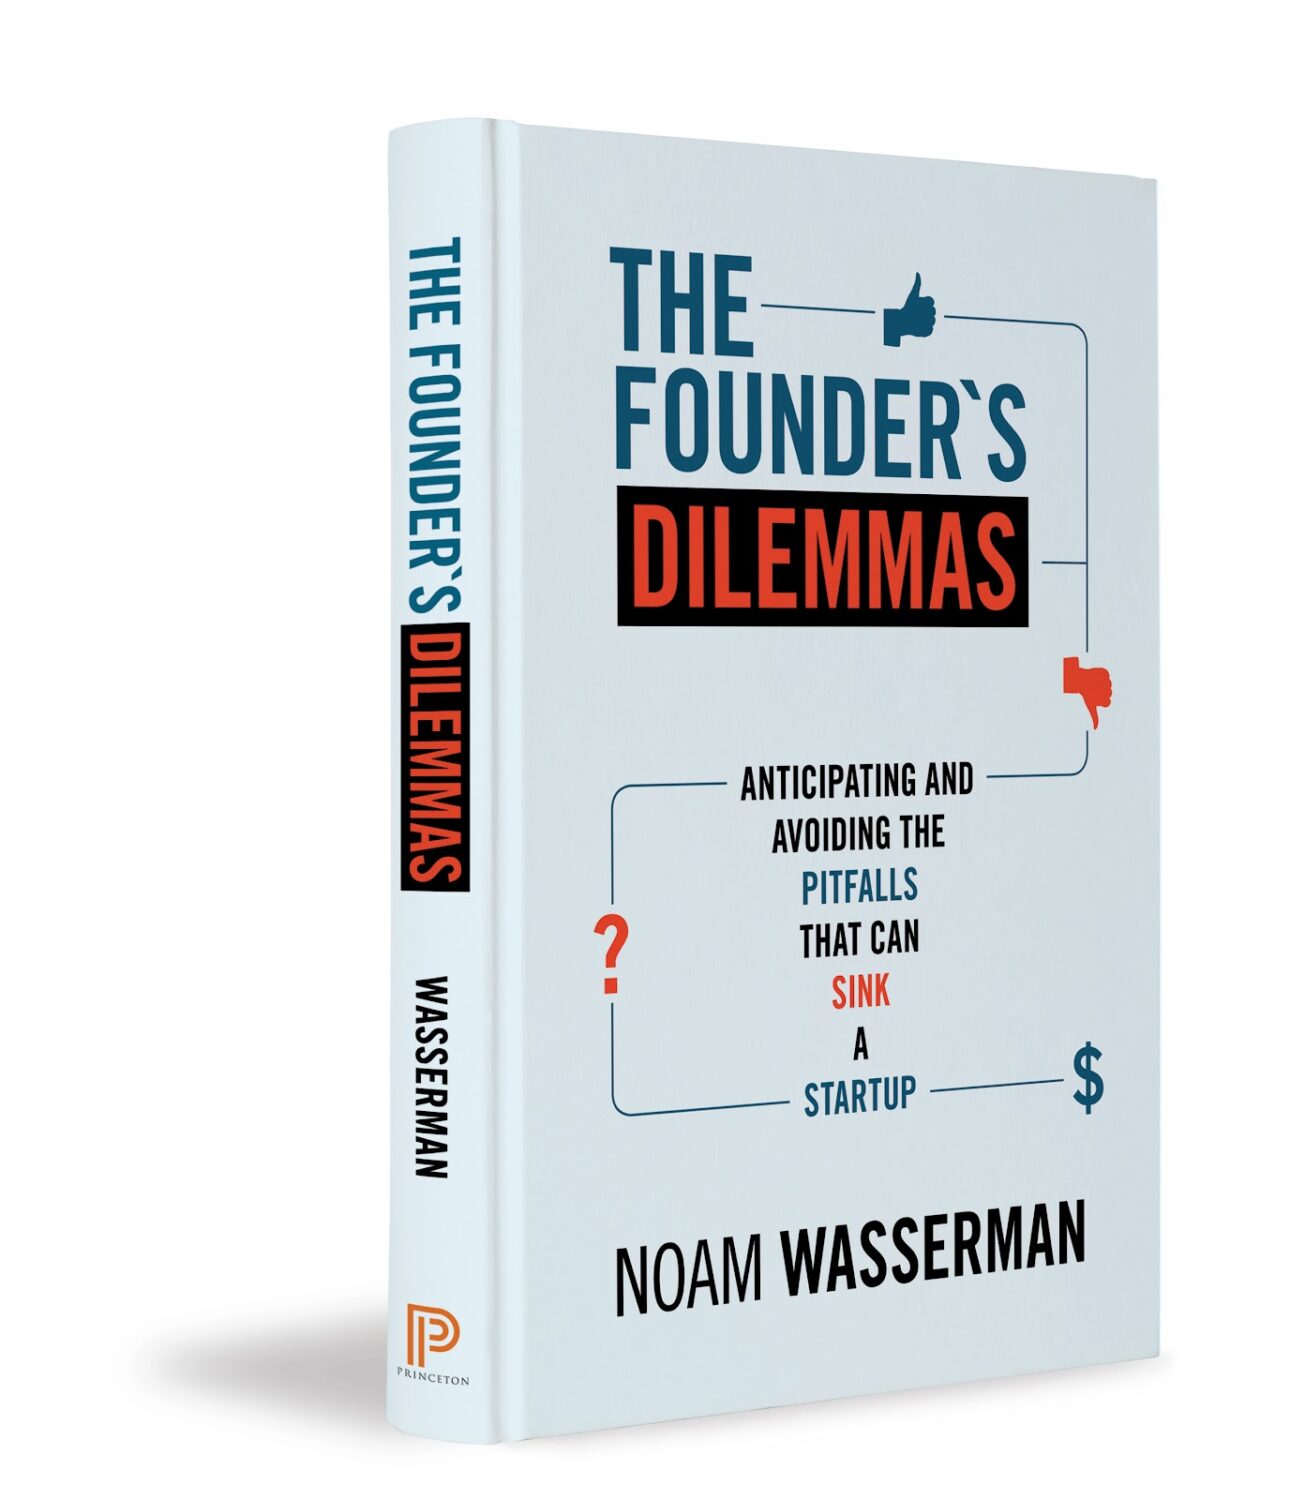 Logo de la startup The Founder's Dilemmas: Anticipating and Avoiding the Pitfalls That Can Sink a Startup